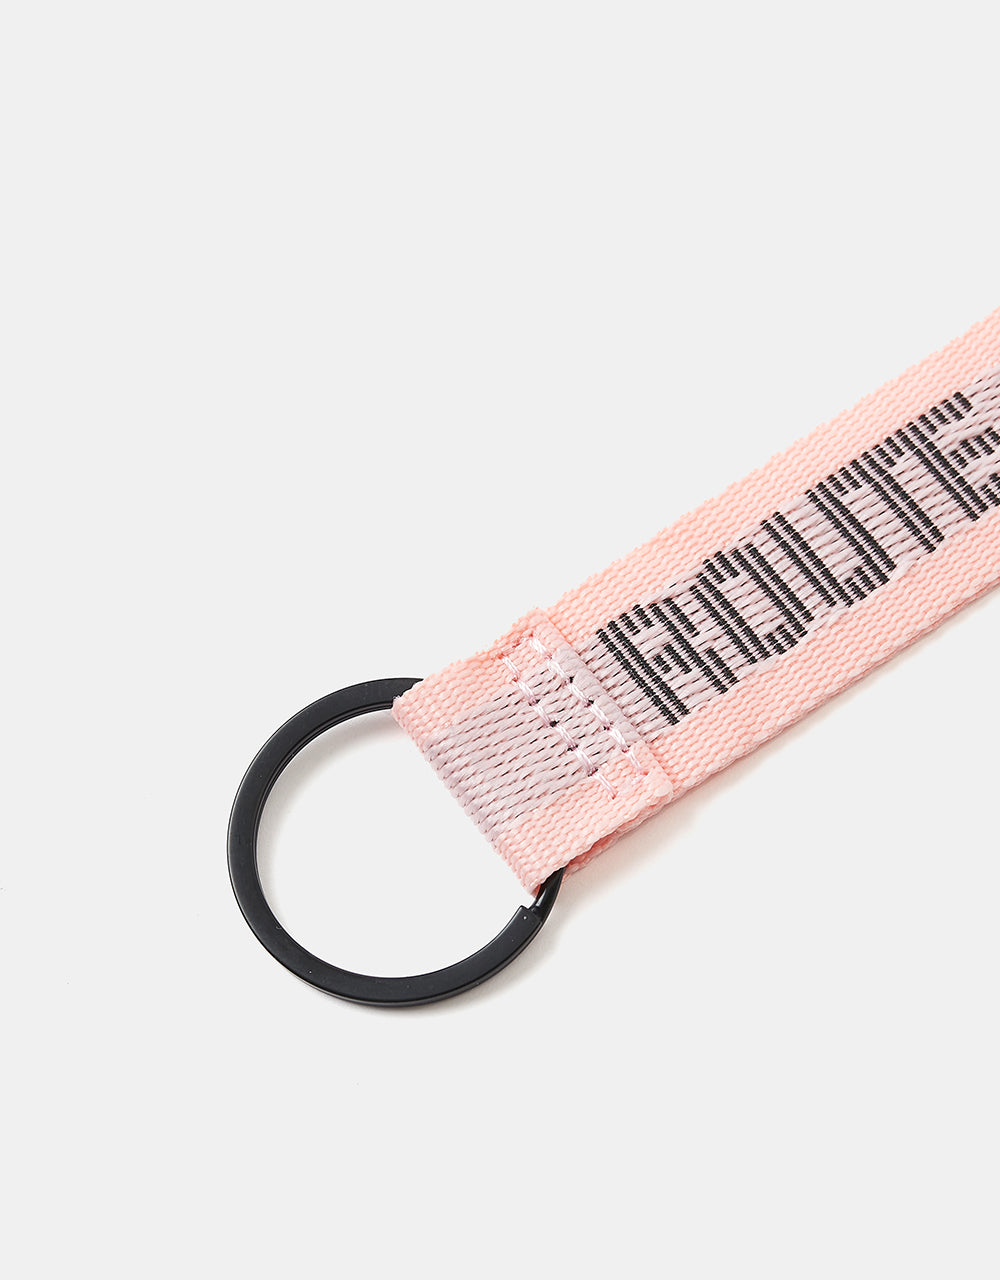 Route One Athletic Key Clip - Light Pink